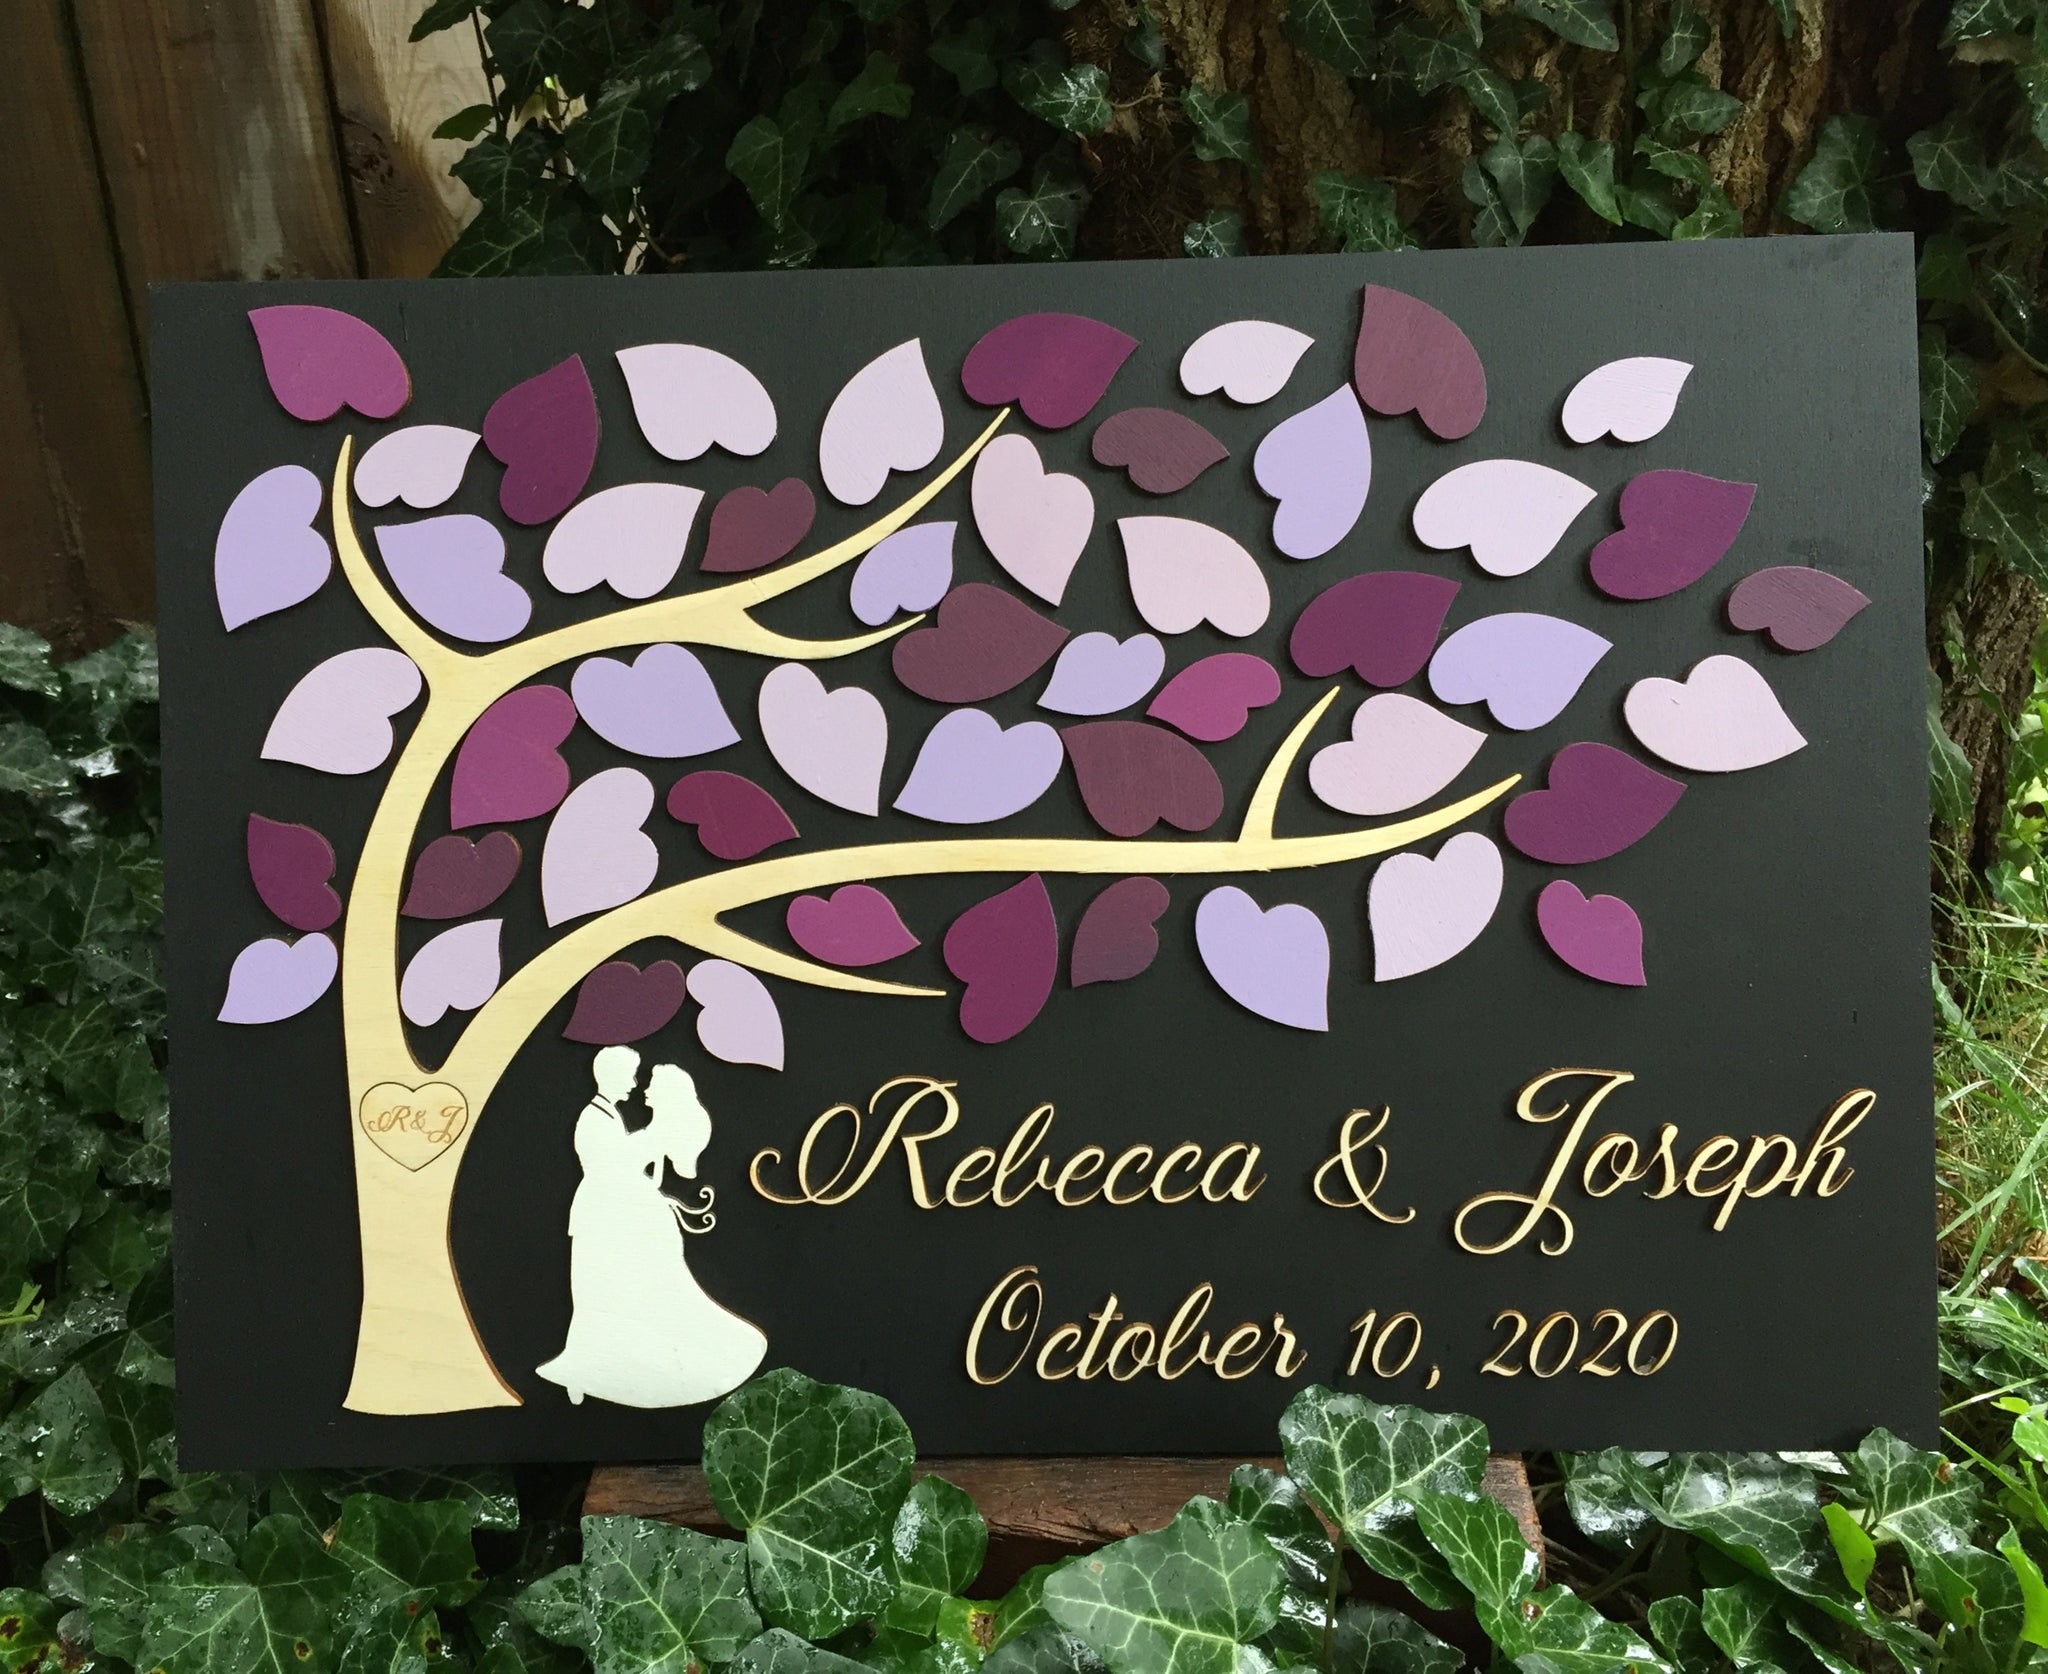 Guest book alternative with couple under tree of life, custom colors and personalized details signyoustyle.com